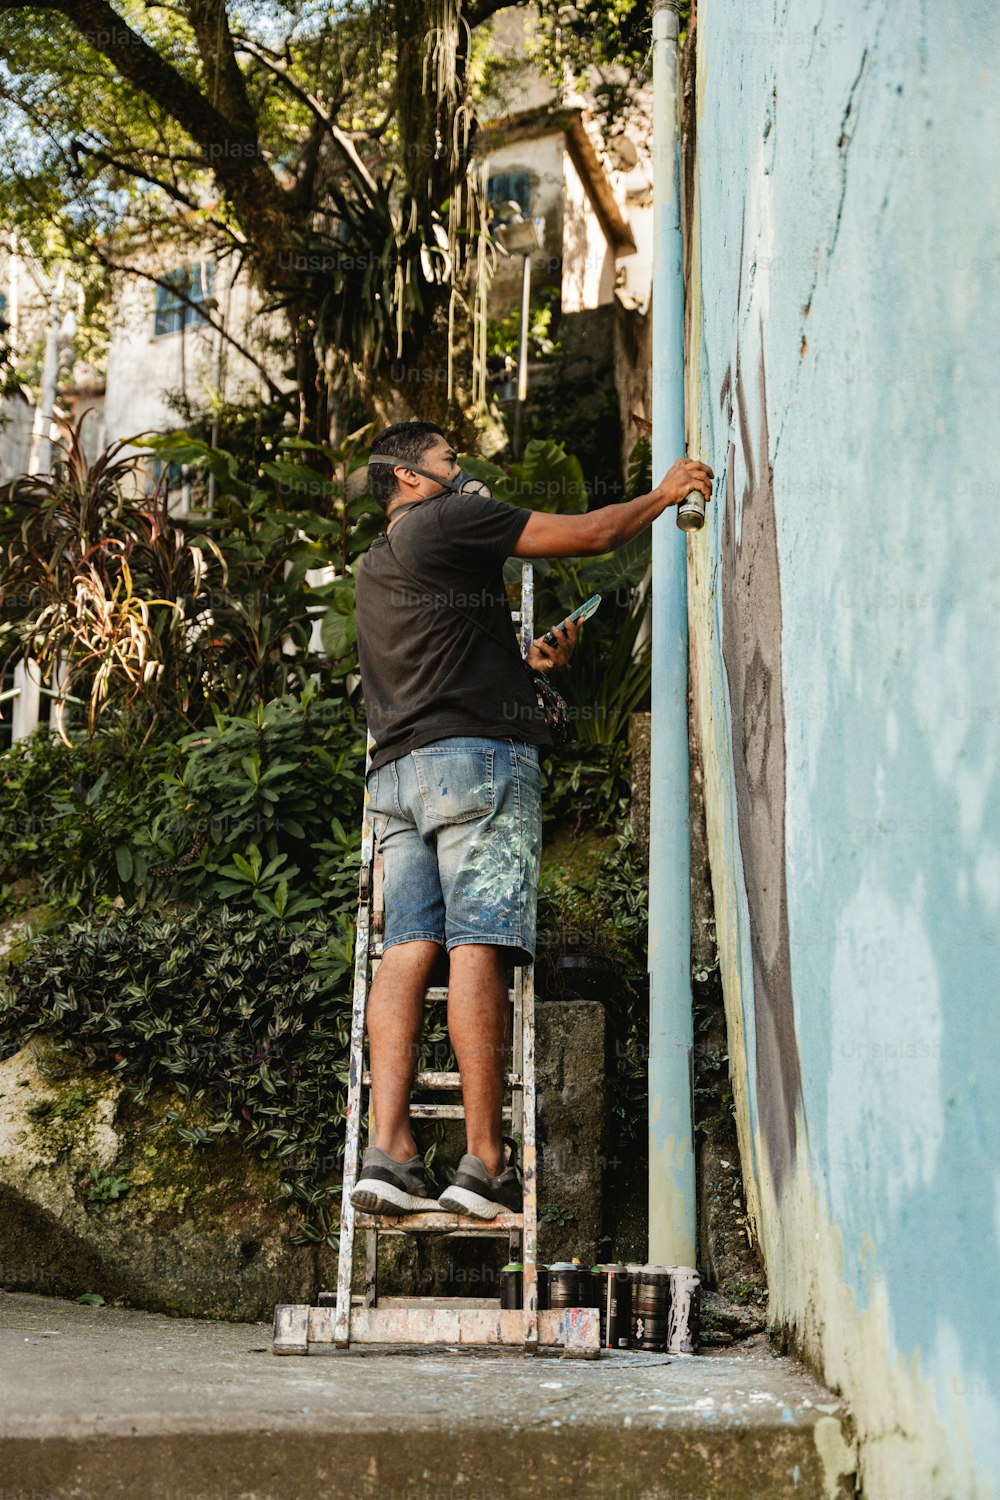 a man on a ladder painting the side of a building